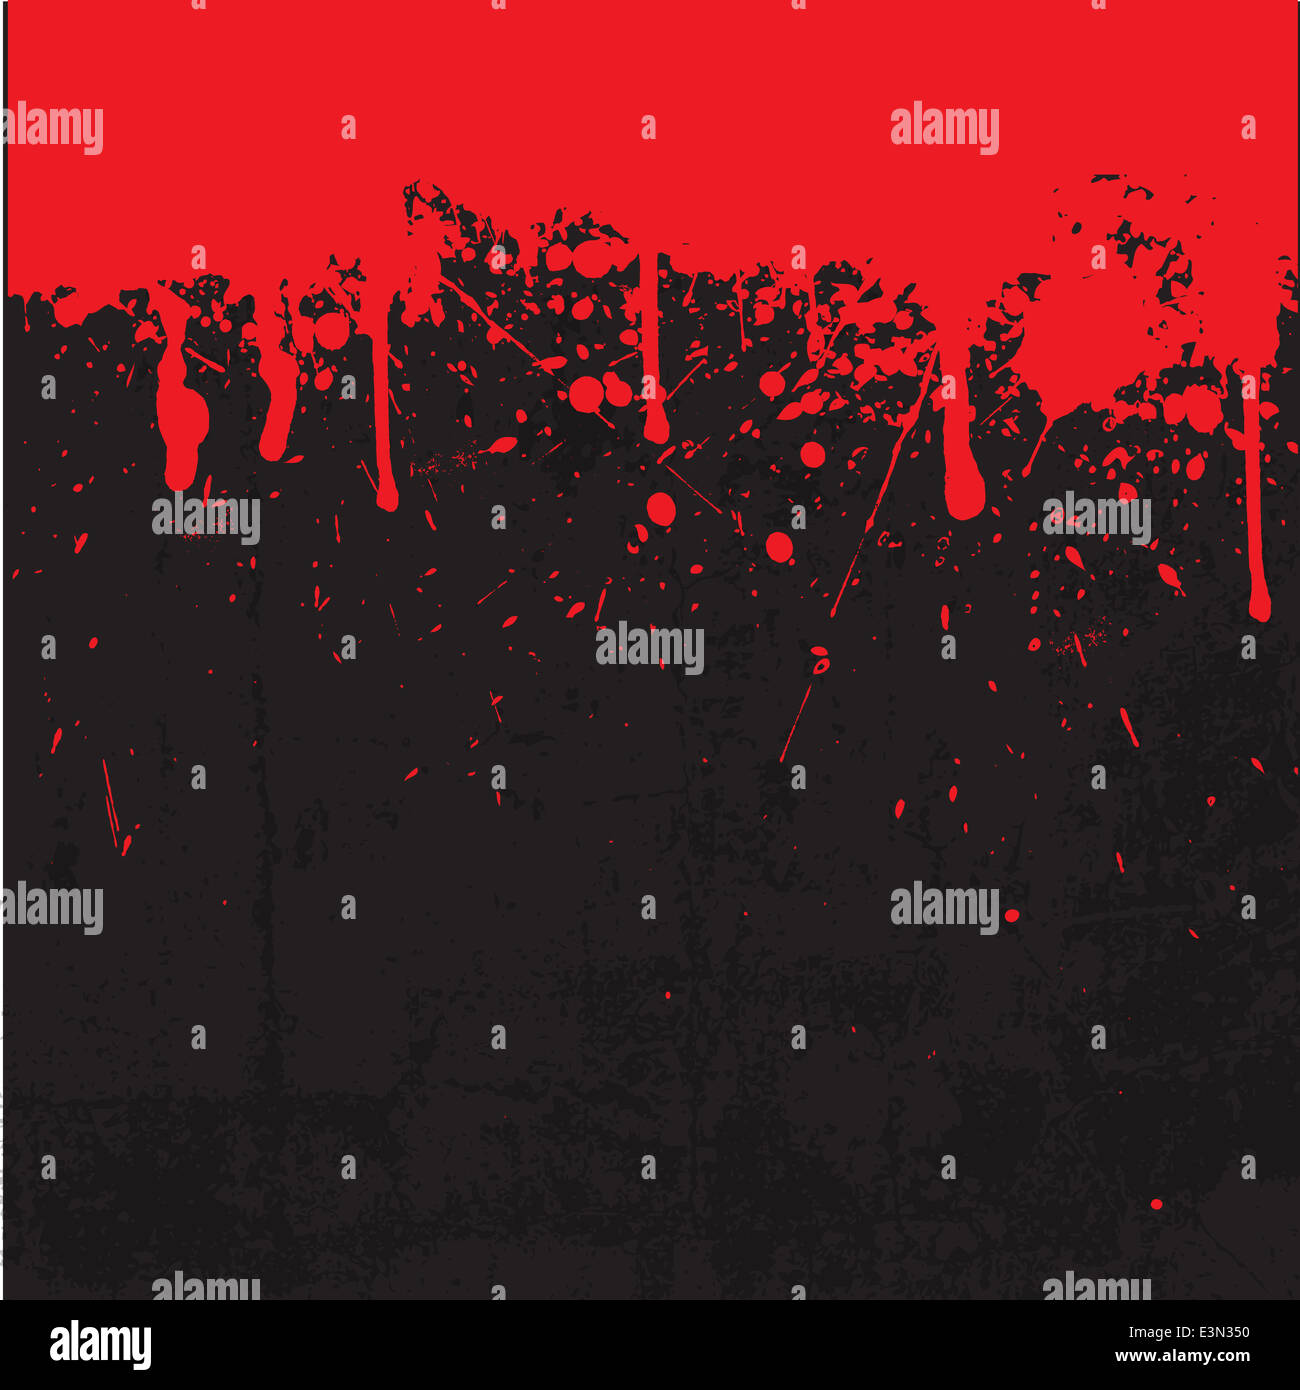 Grunge style Halloween background with blood splats and drips Stock Photo